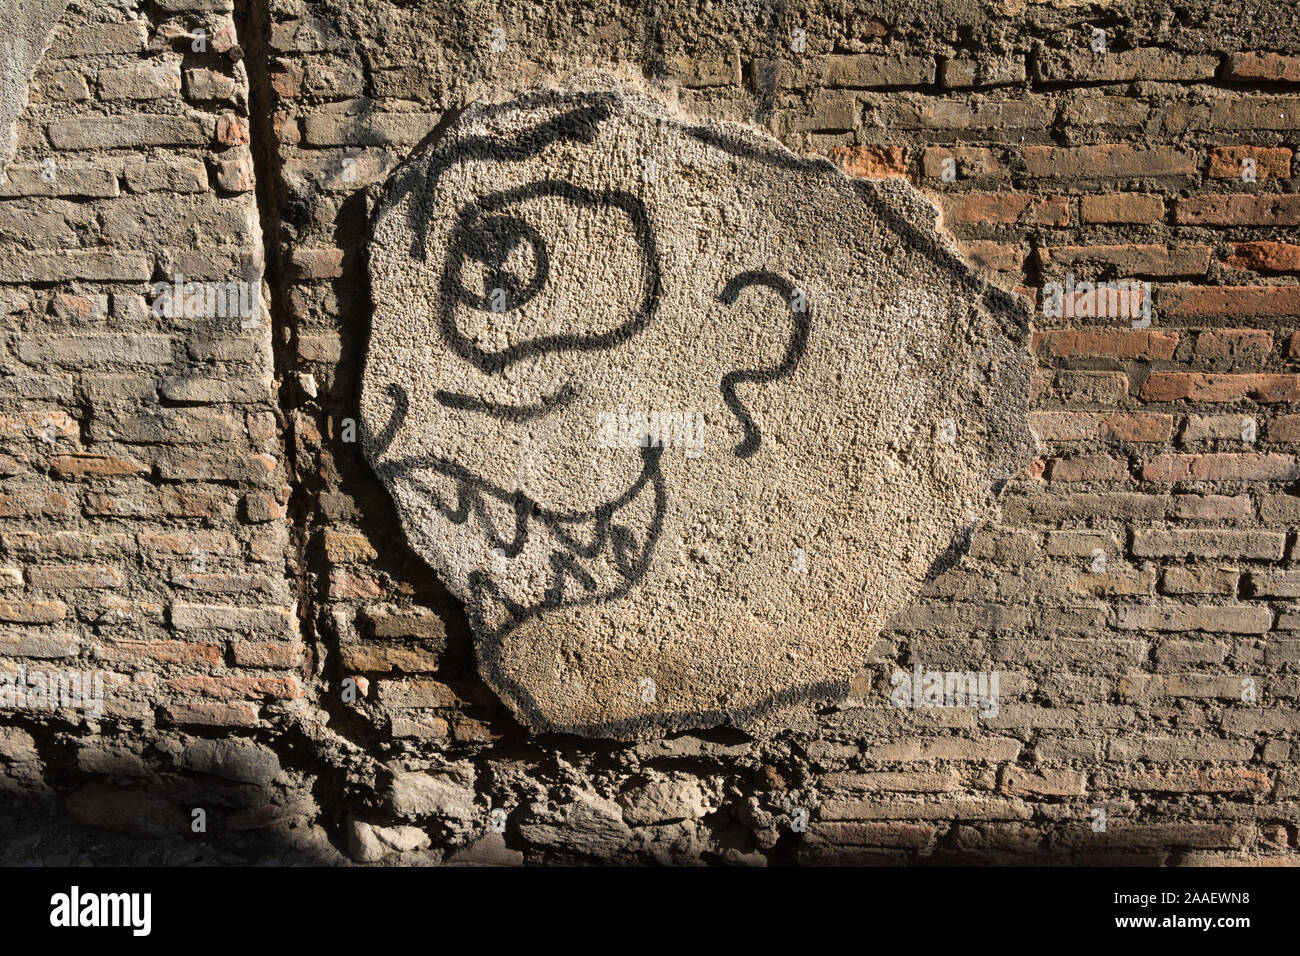 A funny face drawn onto a lump of plaster on an old brick wall Stock Photo